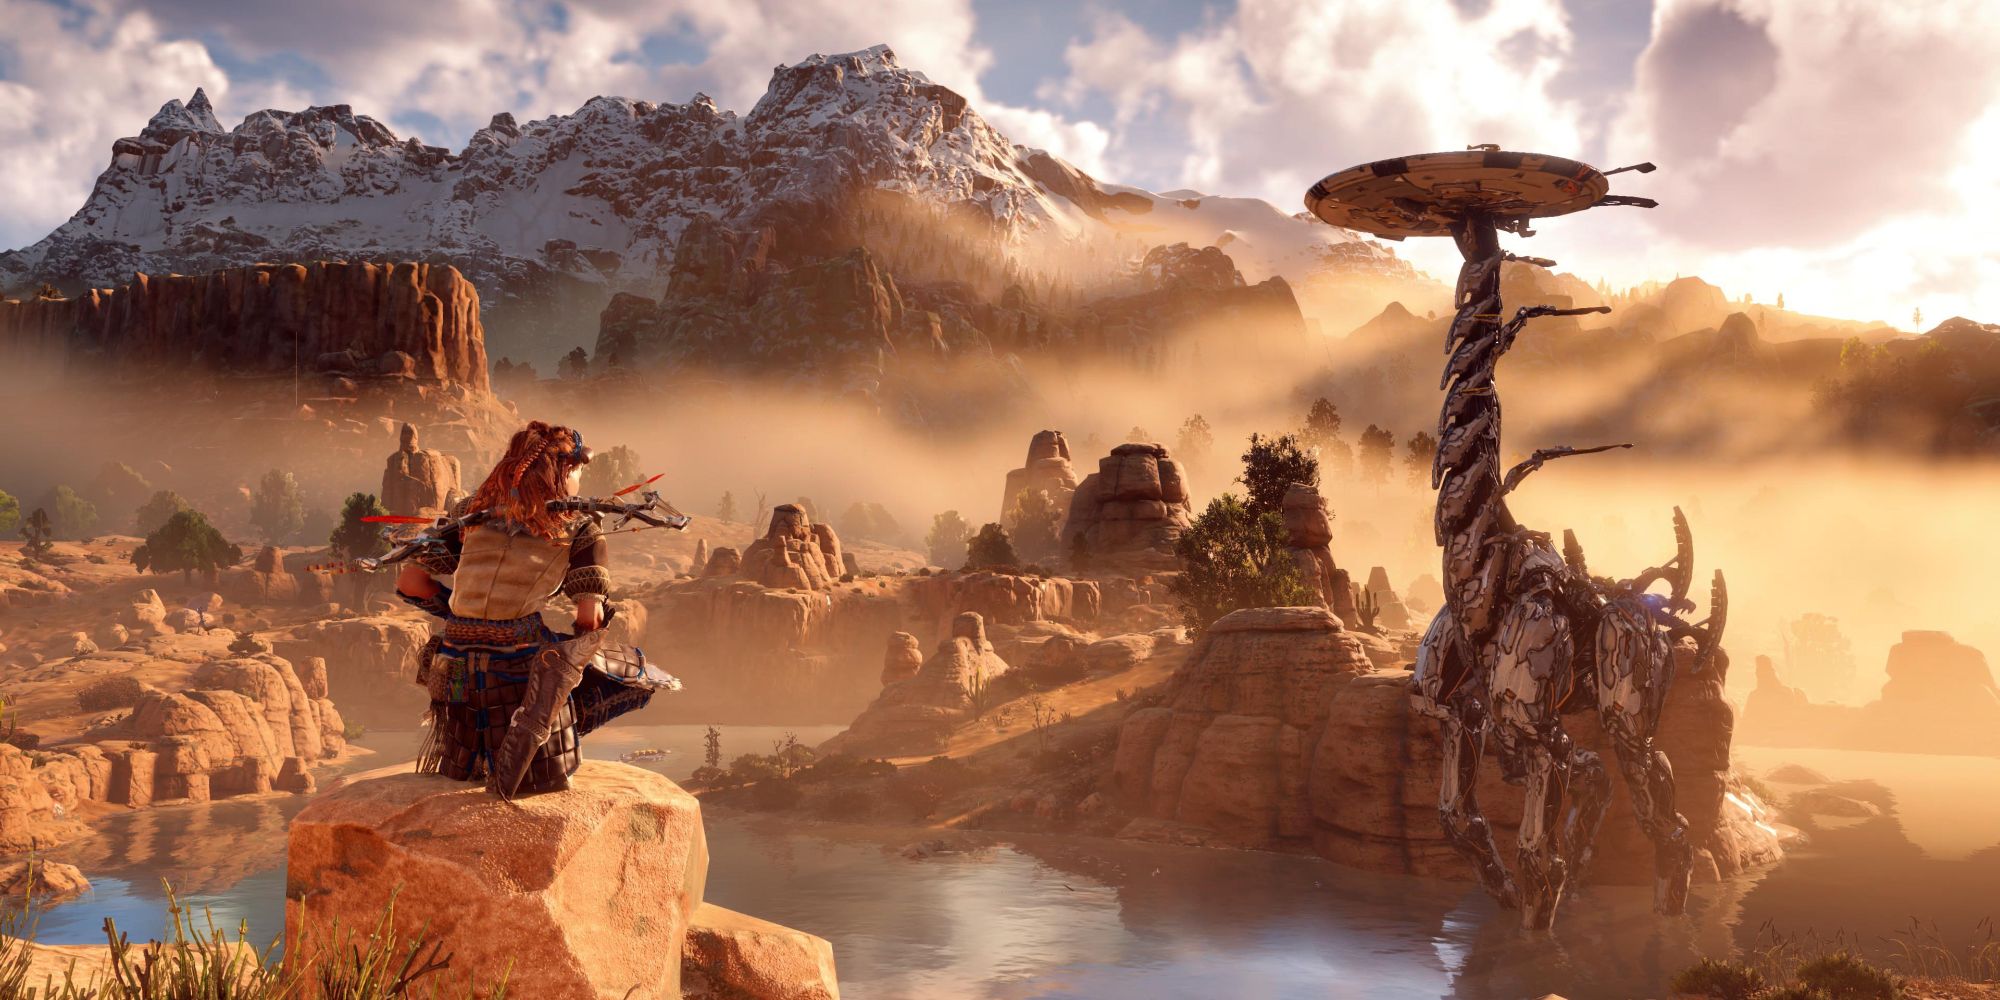 Horizon Zero Dawn launched only three days before Breath of the Wild and the Nintendo Switch